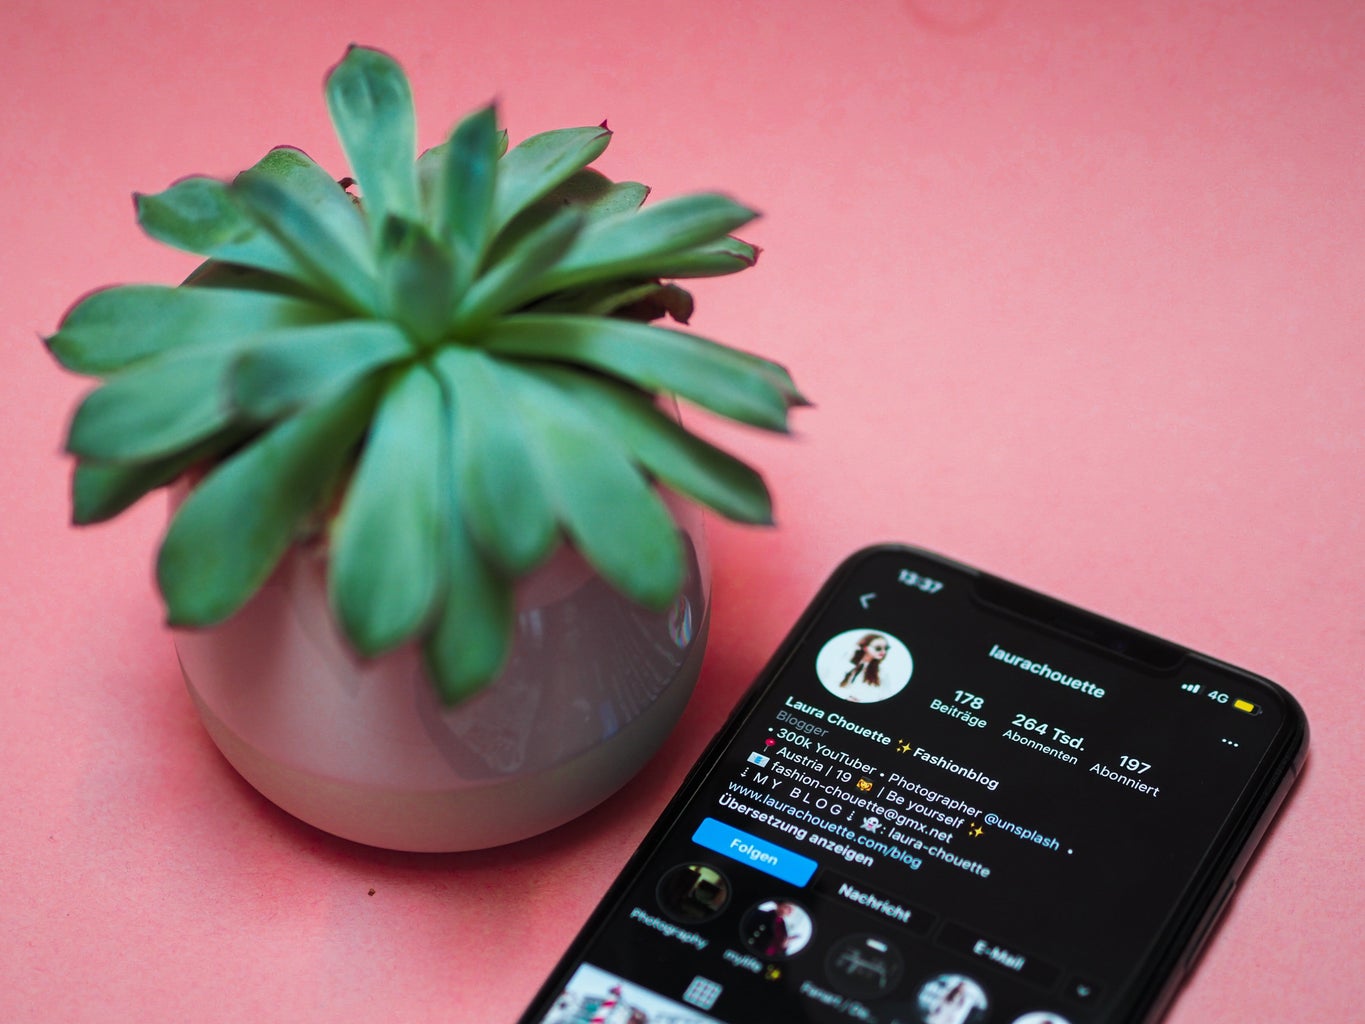 An iphone (in the screen you can see the app of instagram open) next to a plant